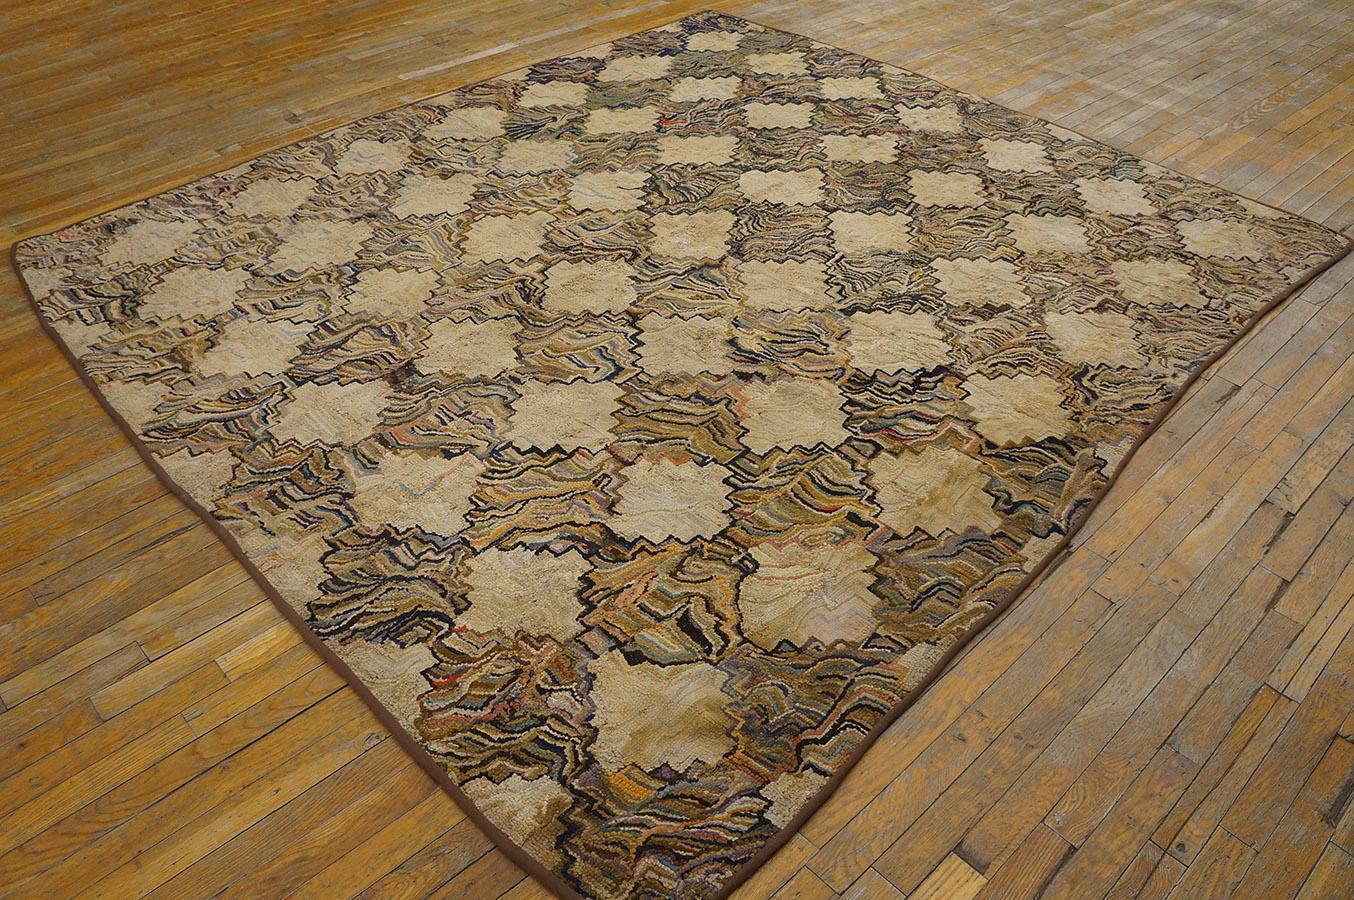 Antique American Hooked rug, size: 7'6